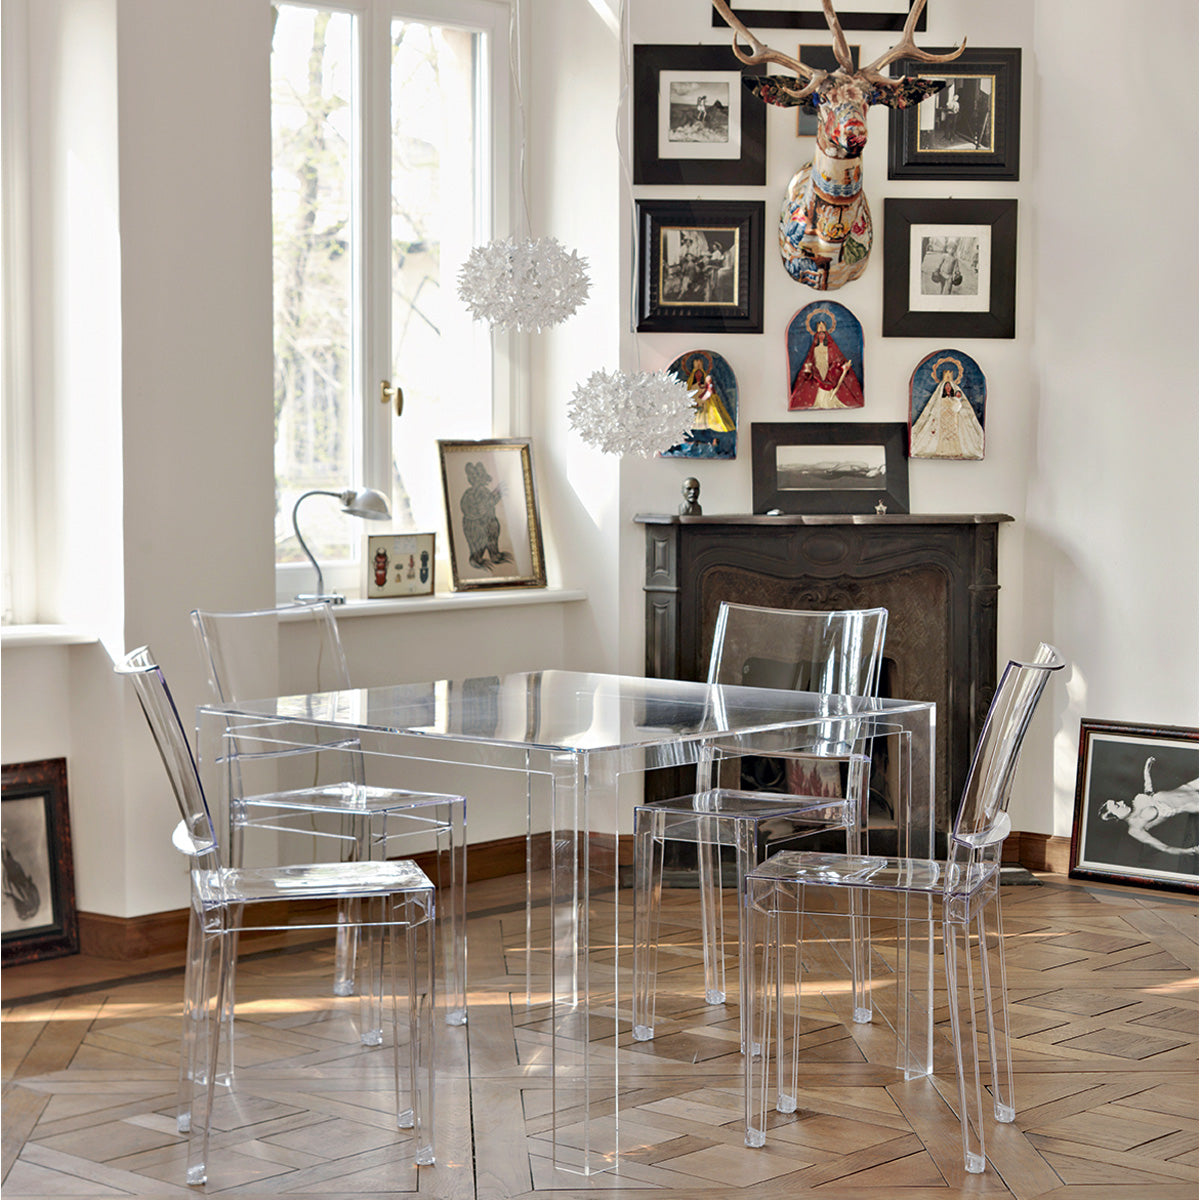 Invisible Table - Kartell